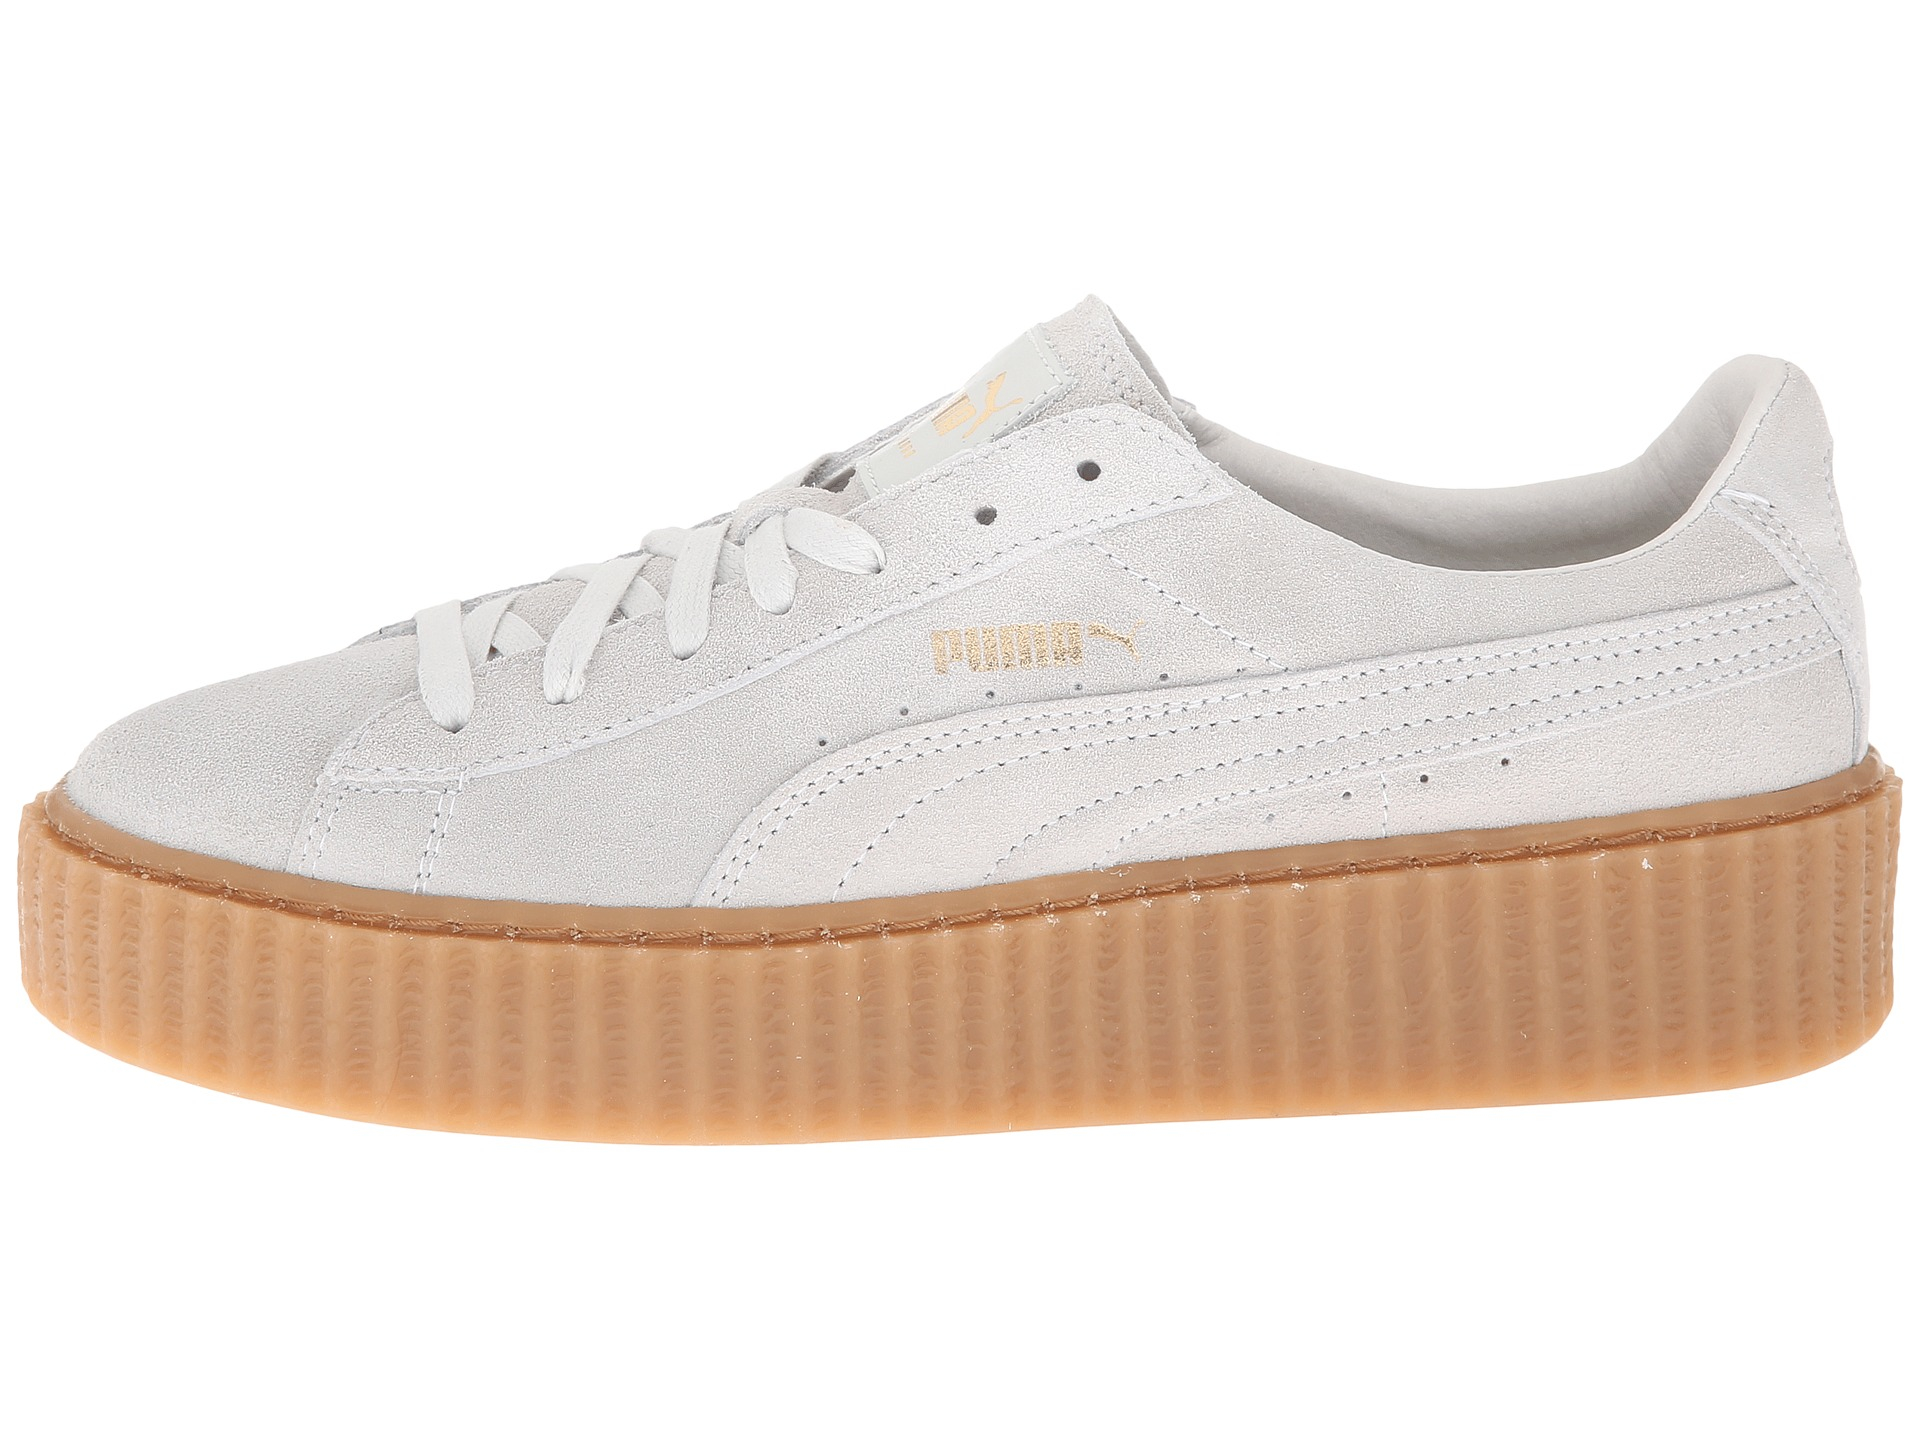 PUMA Rihanna X Suede Creepers in White - Lyst